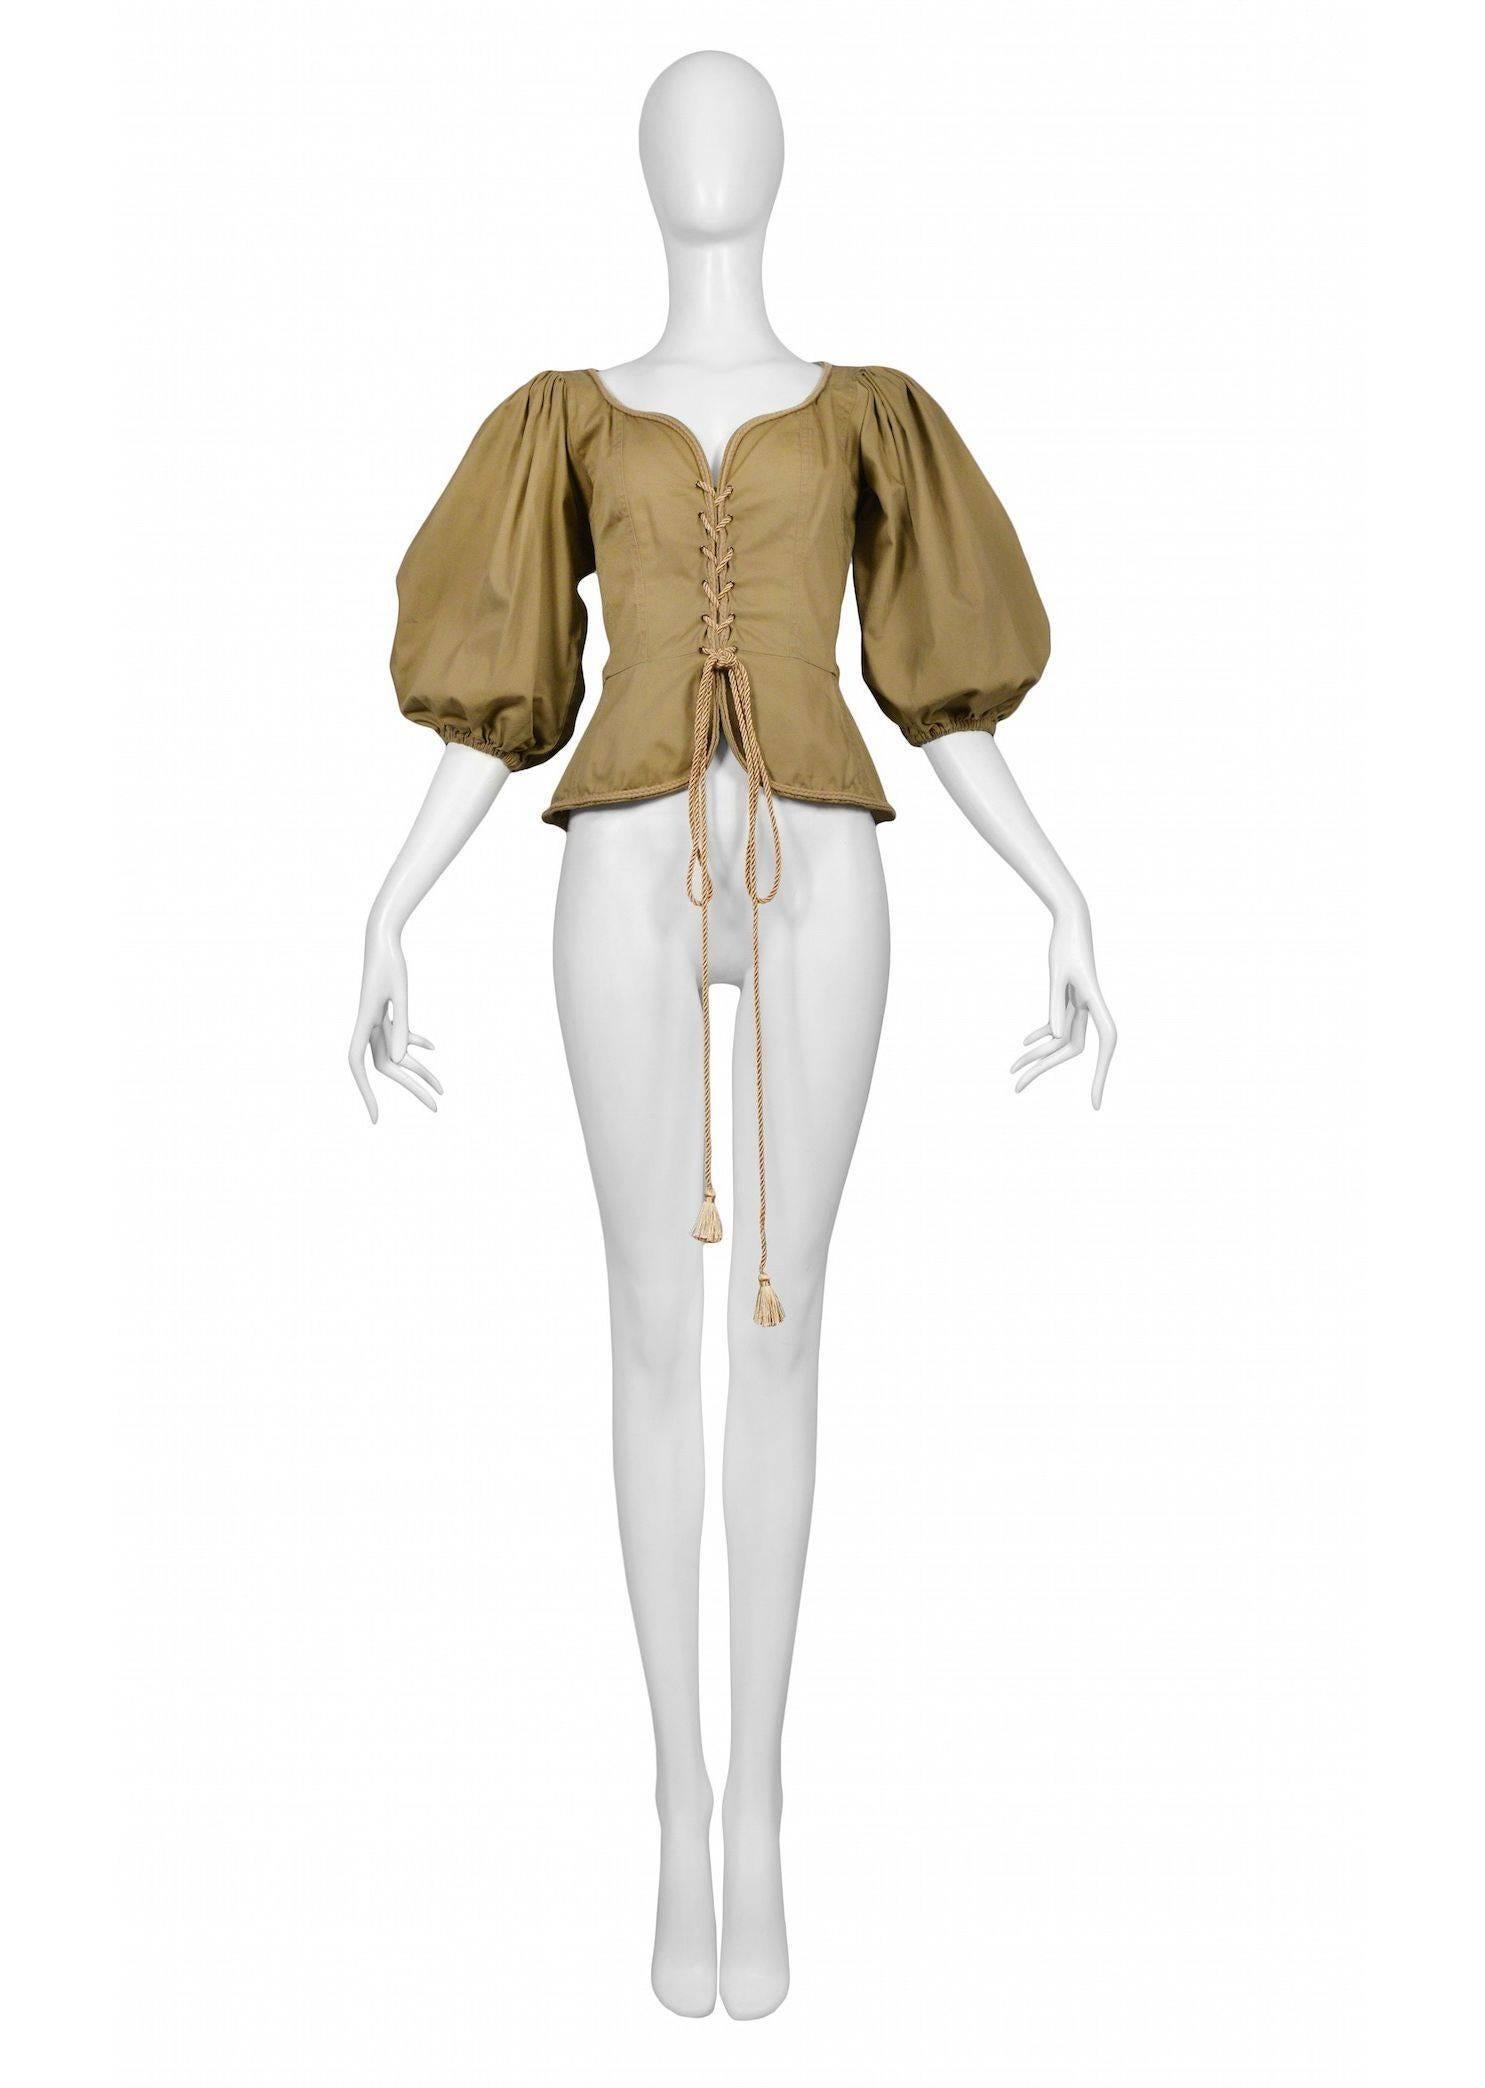 Vintage Yves Saint Laurent khaki safari corset peasant top featuring a built in peplum below the waist, rope tassel lacing up the front and full peasant style sleeves.